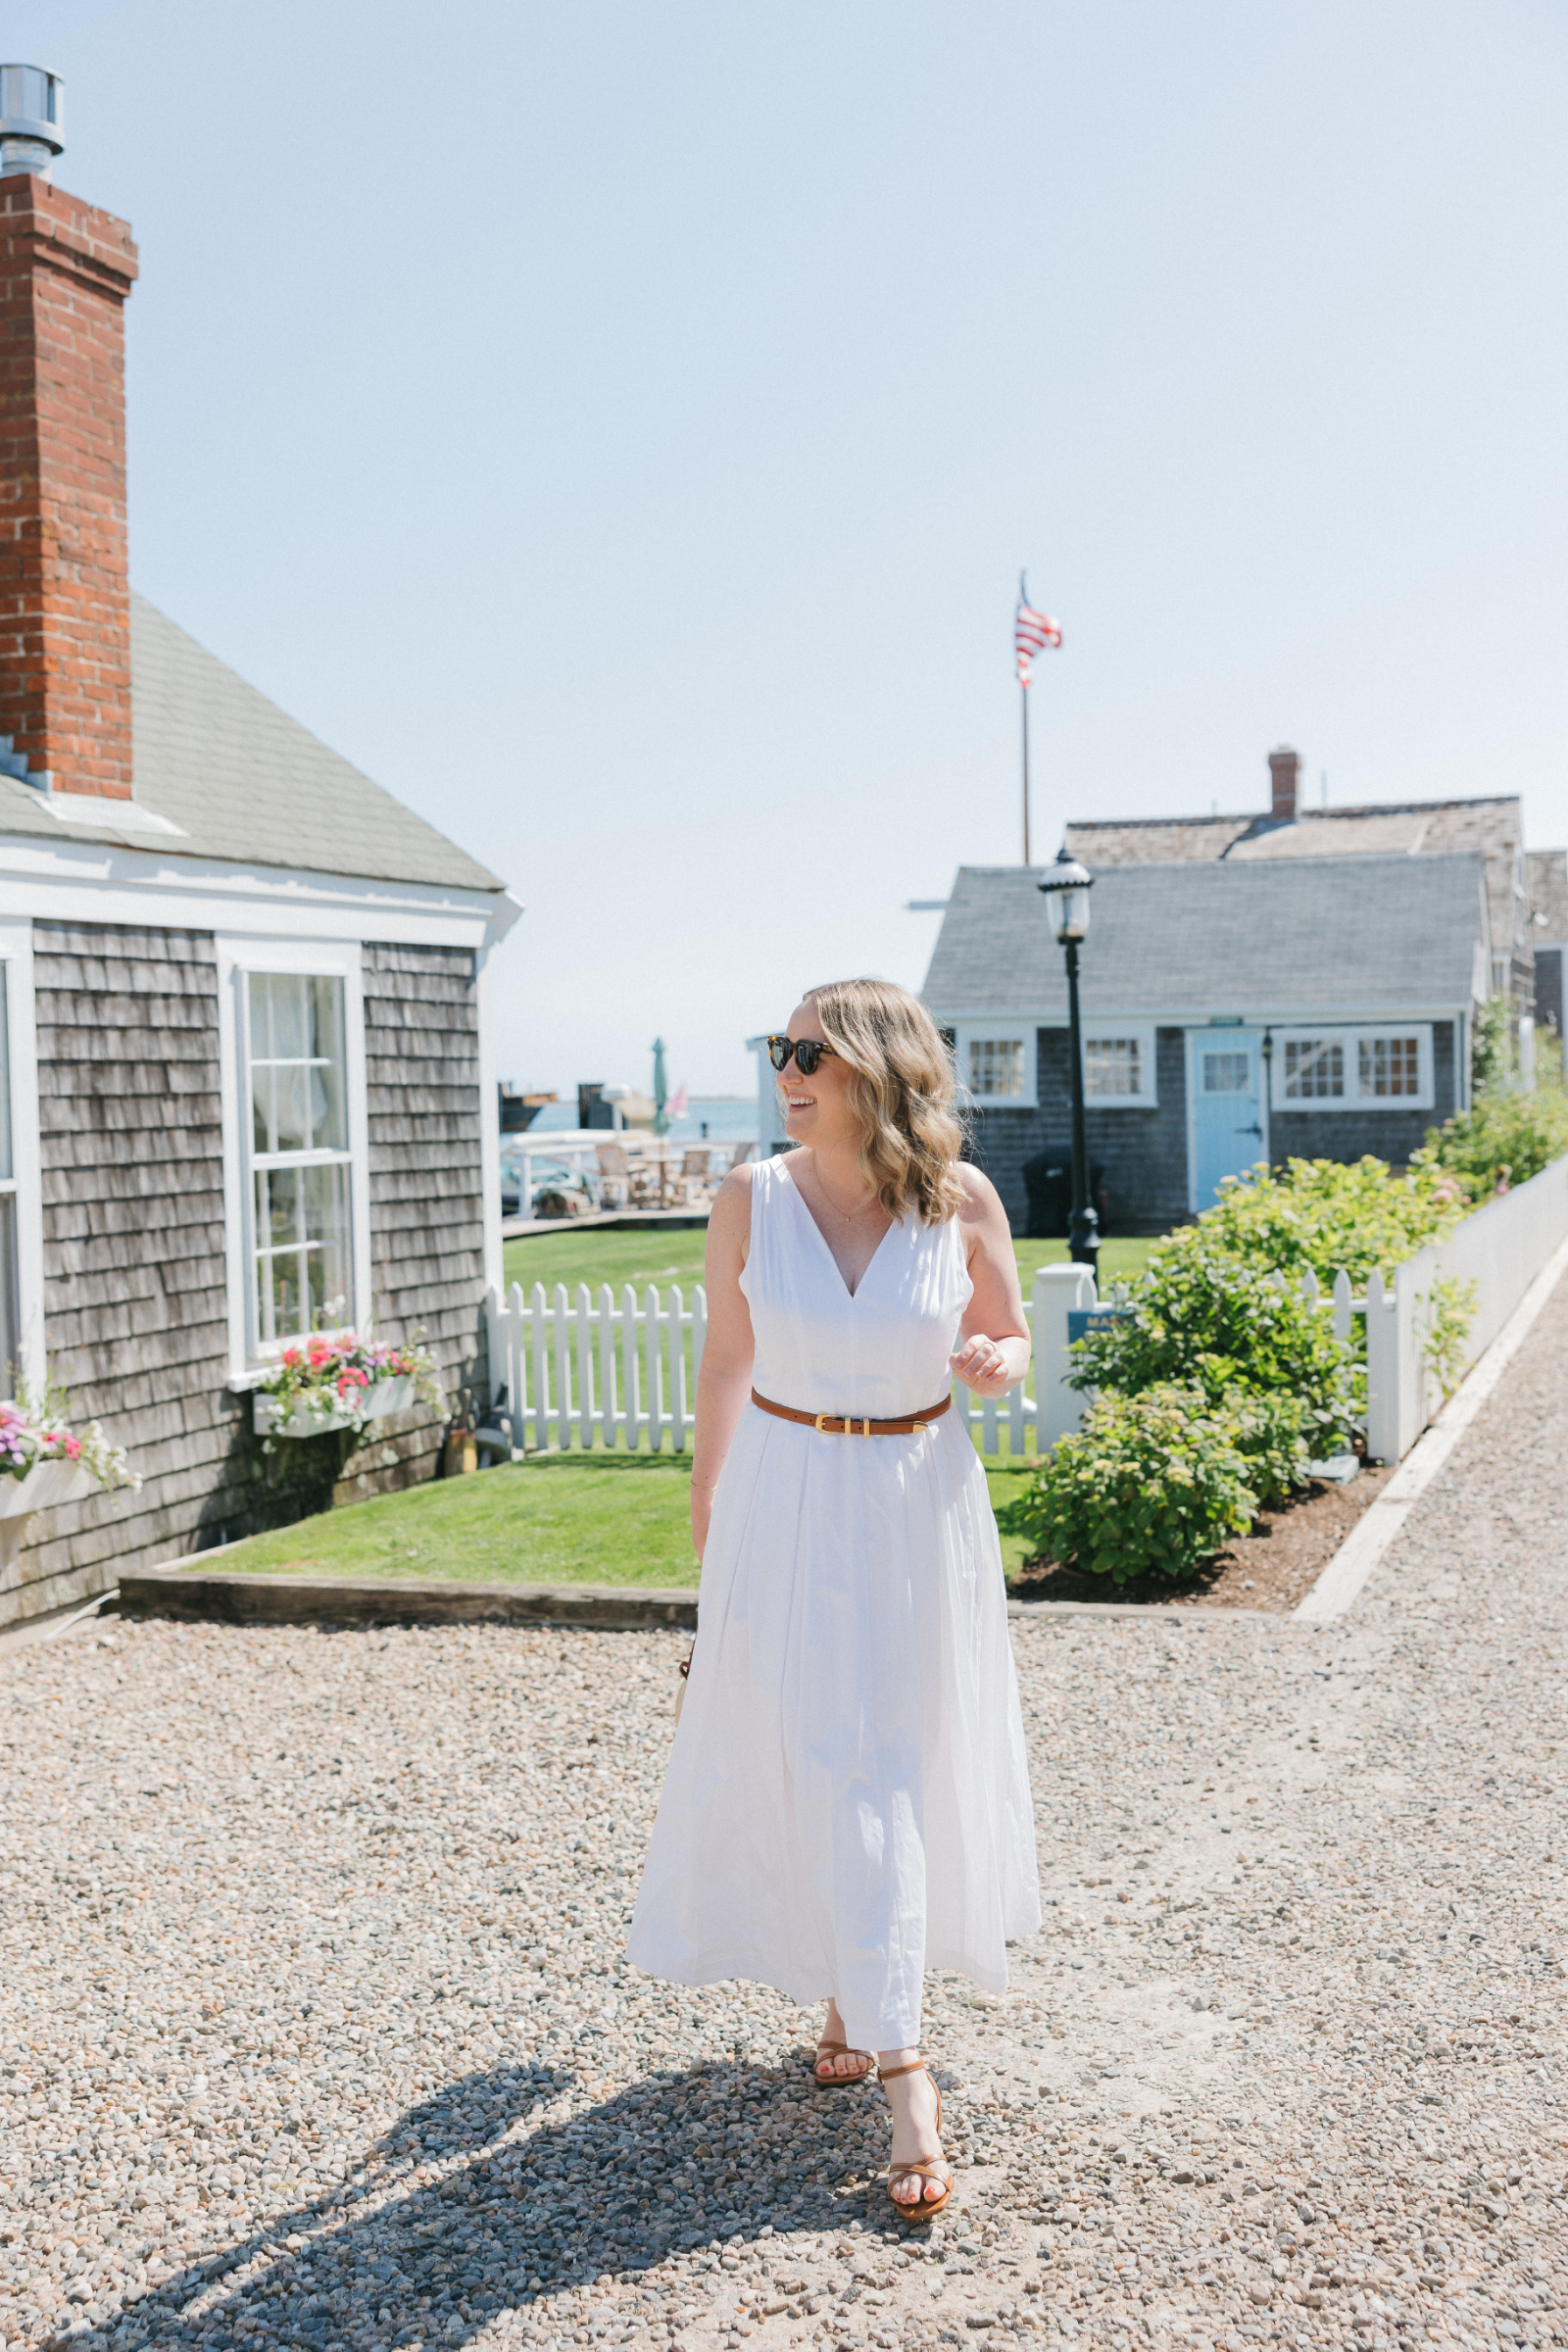 Things To Do in Nantucket